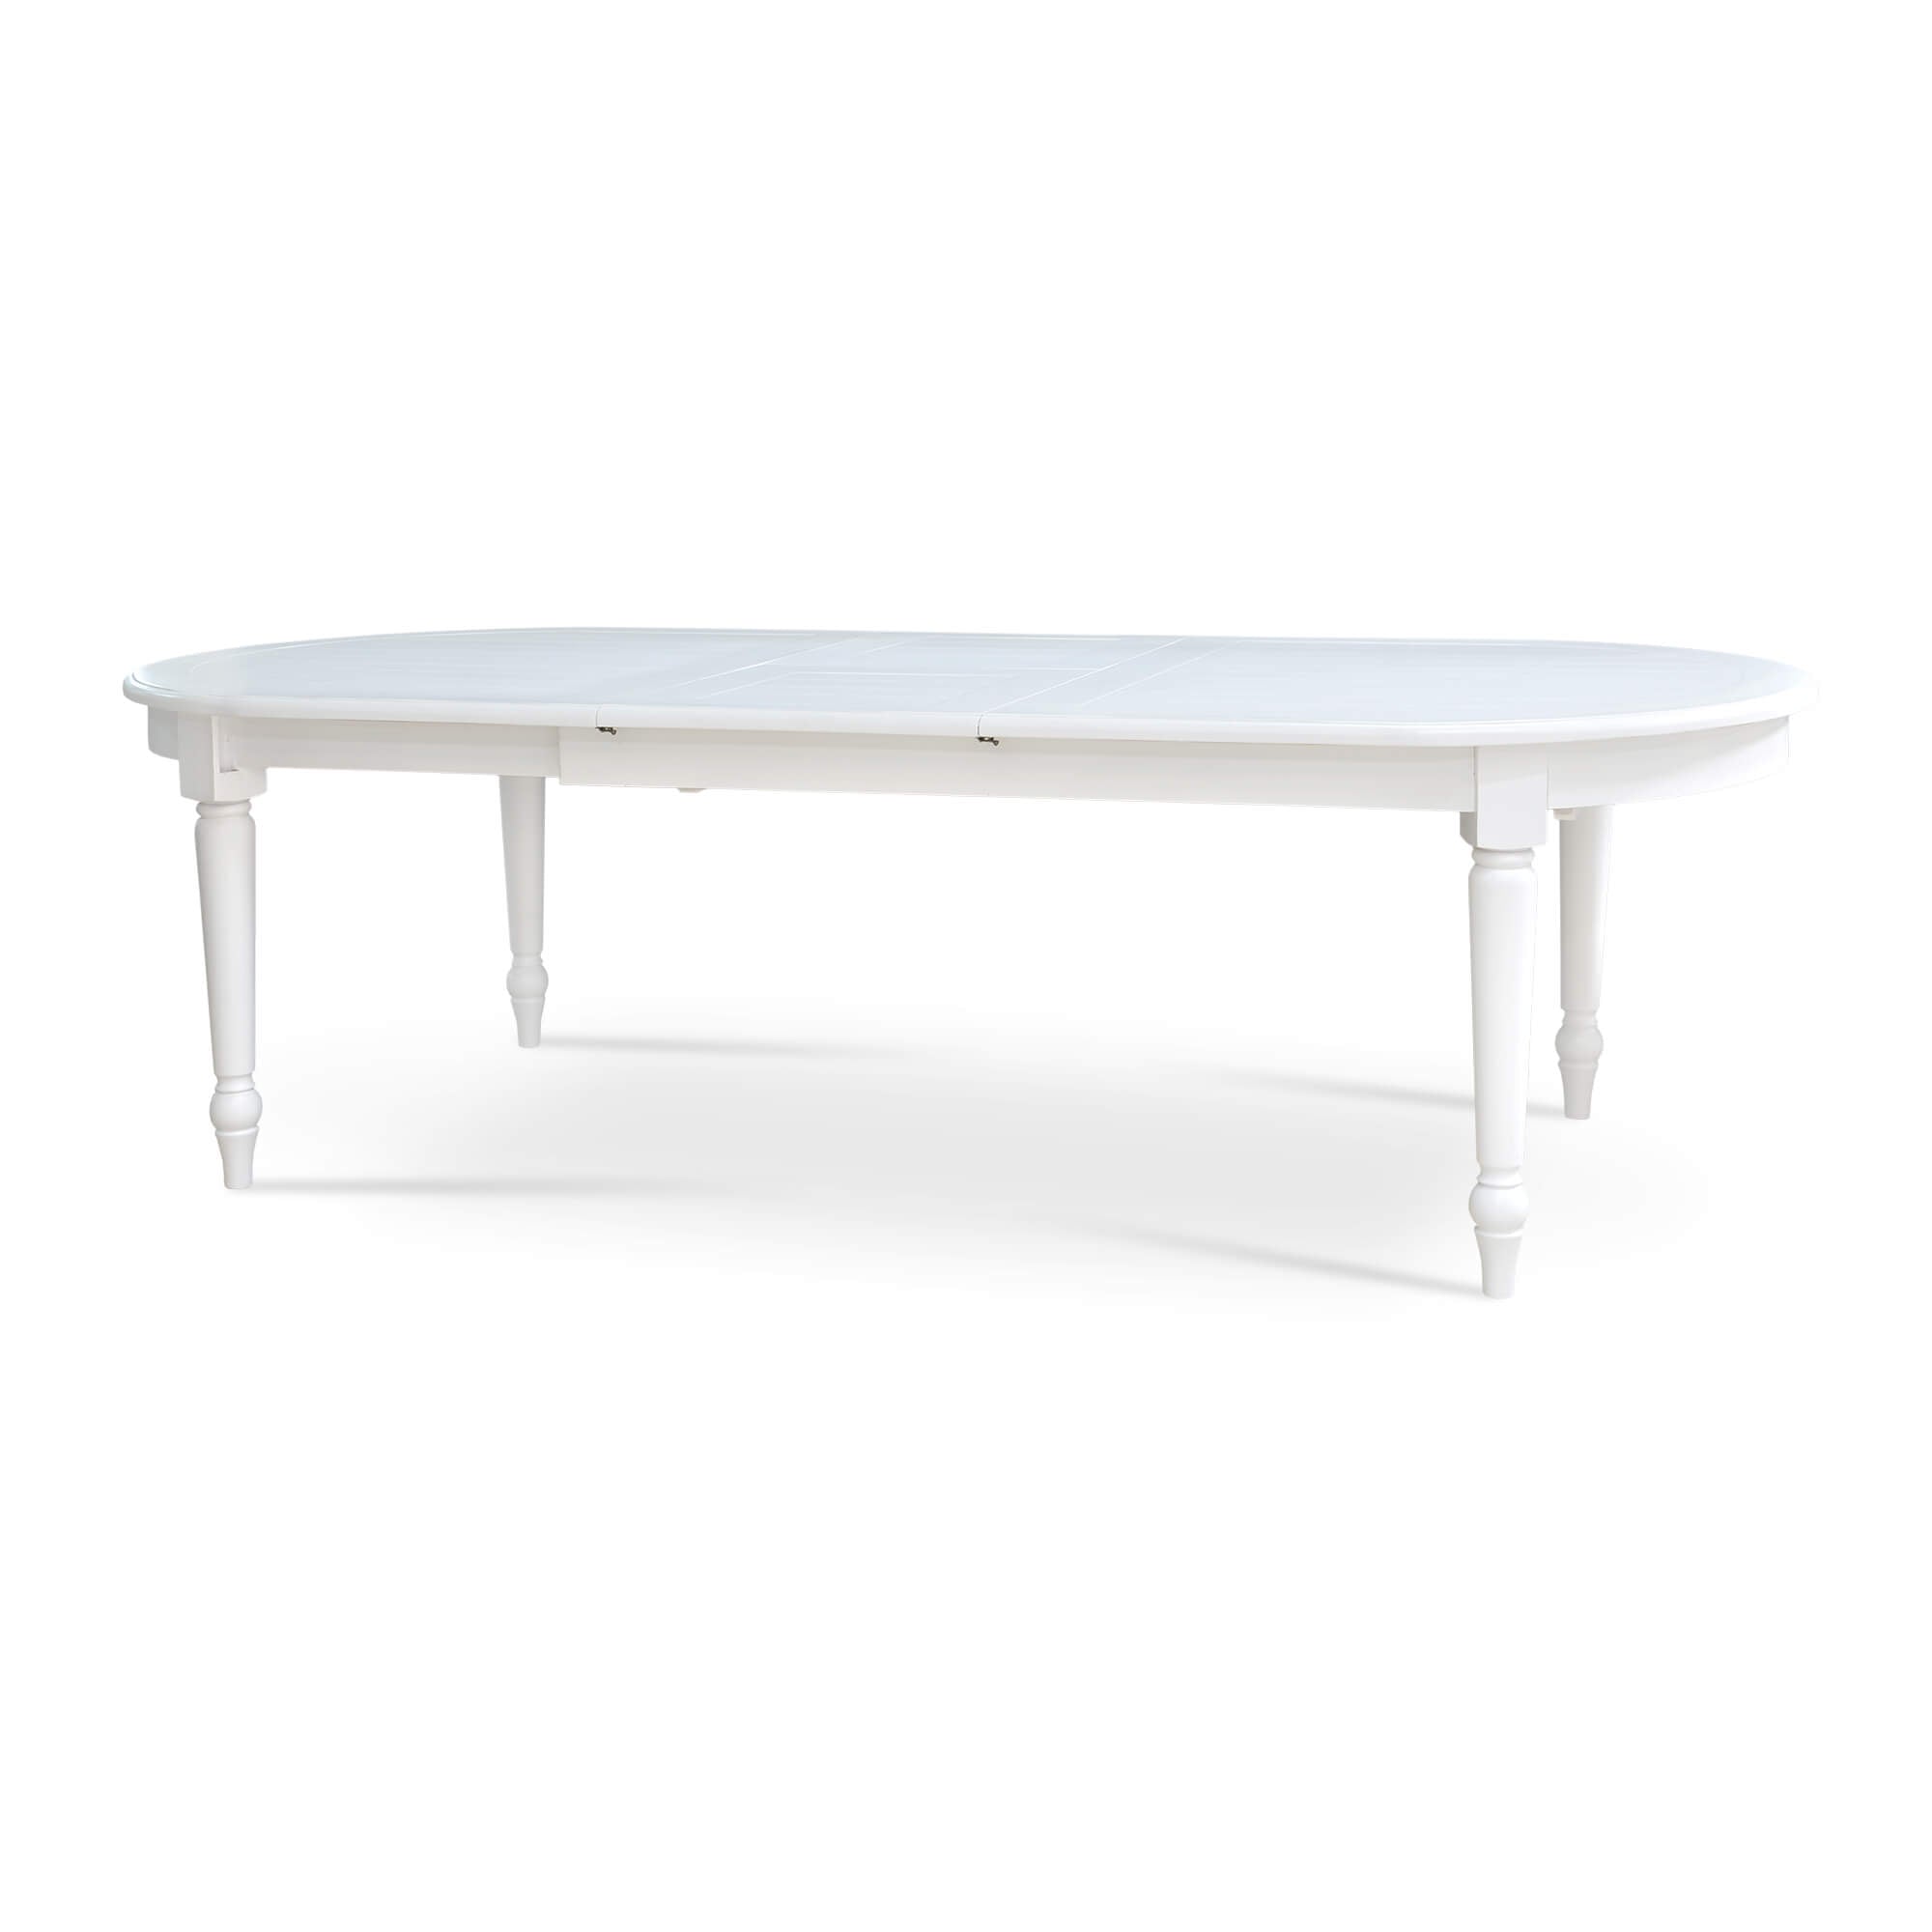 Market Open Extension Table  Architectural White   82" - 103"